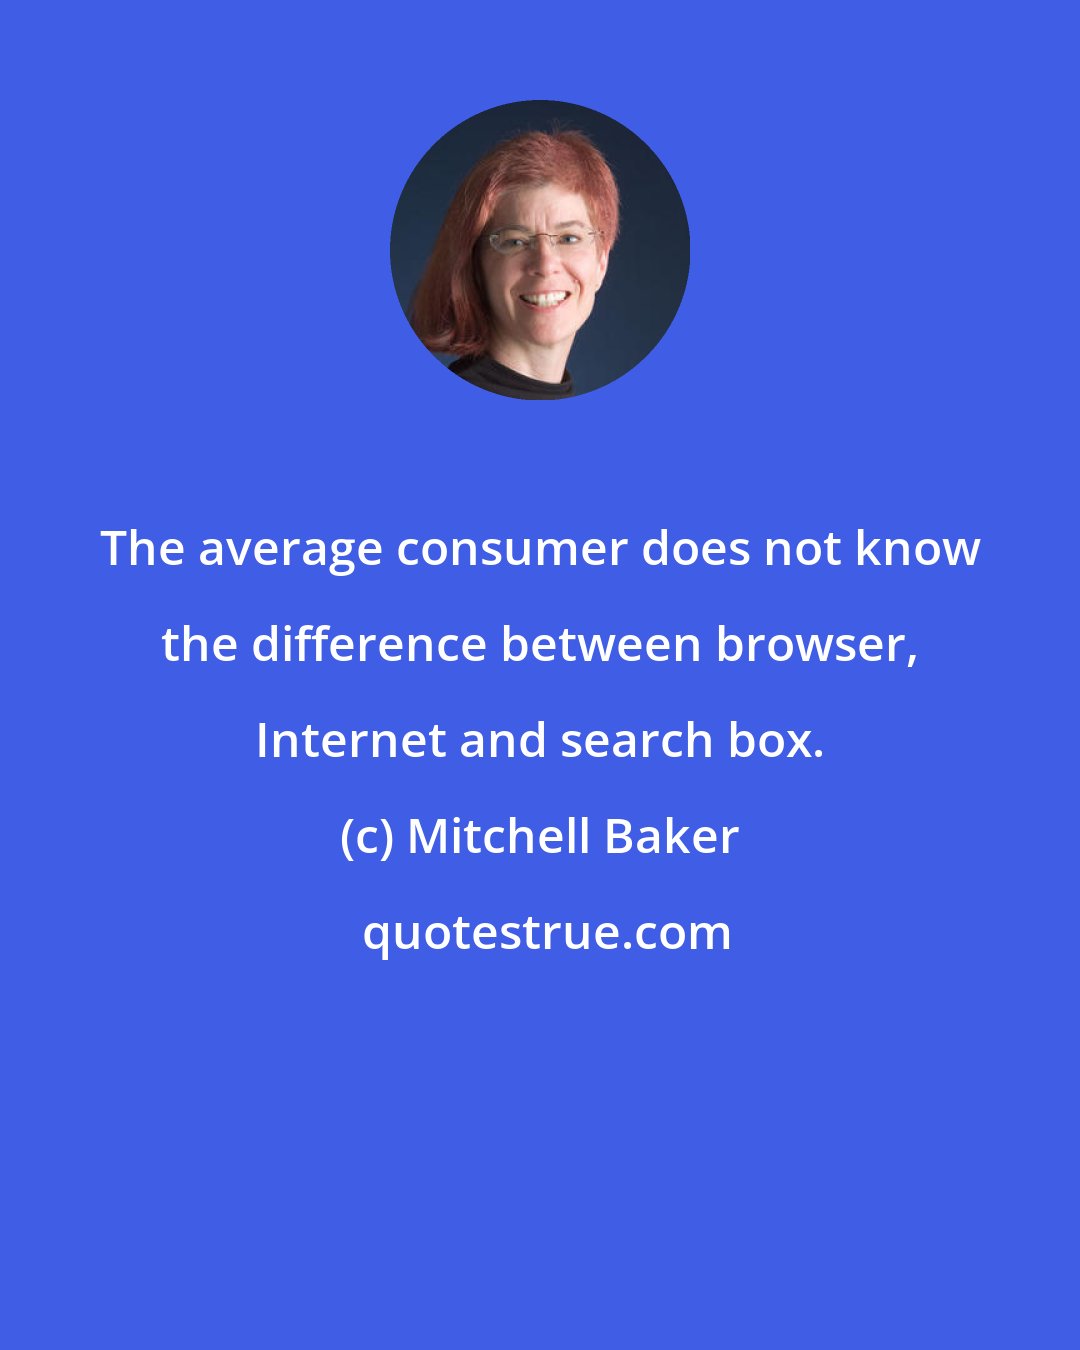 Mitchell Baker: The average consumer does not know the difference between browser, Internet and search box.